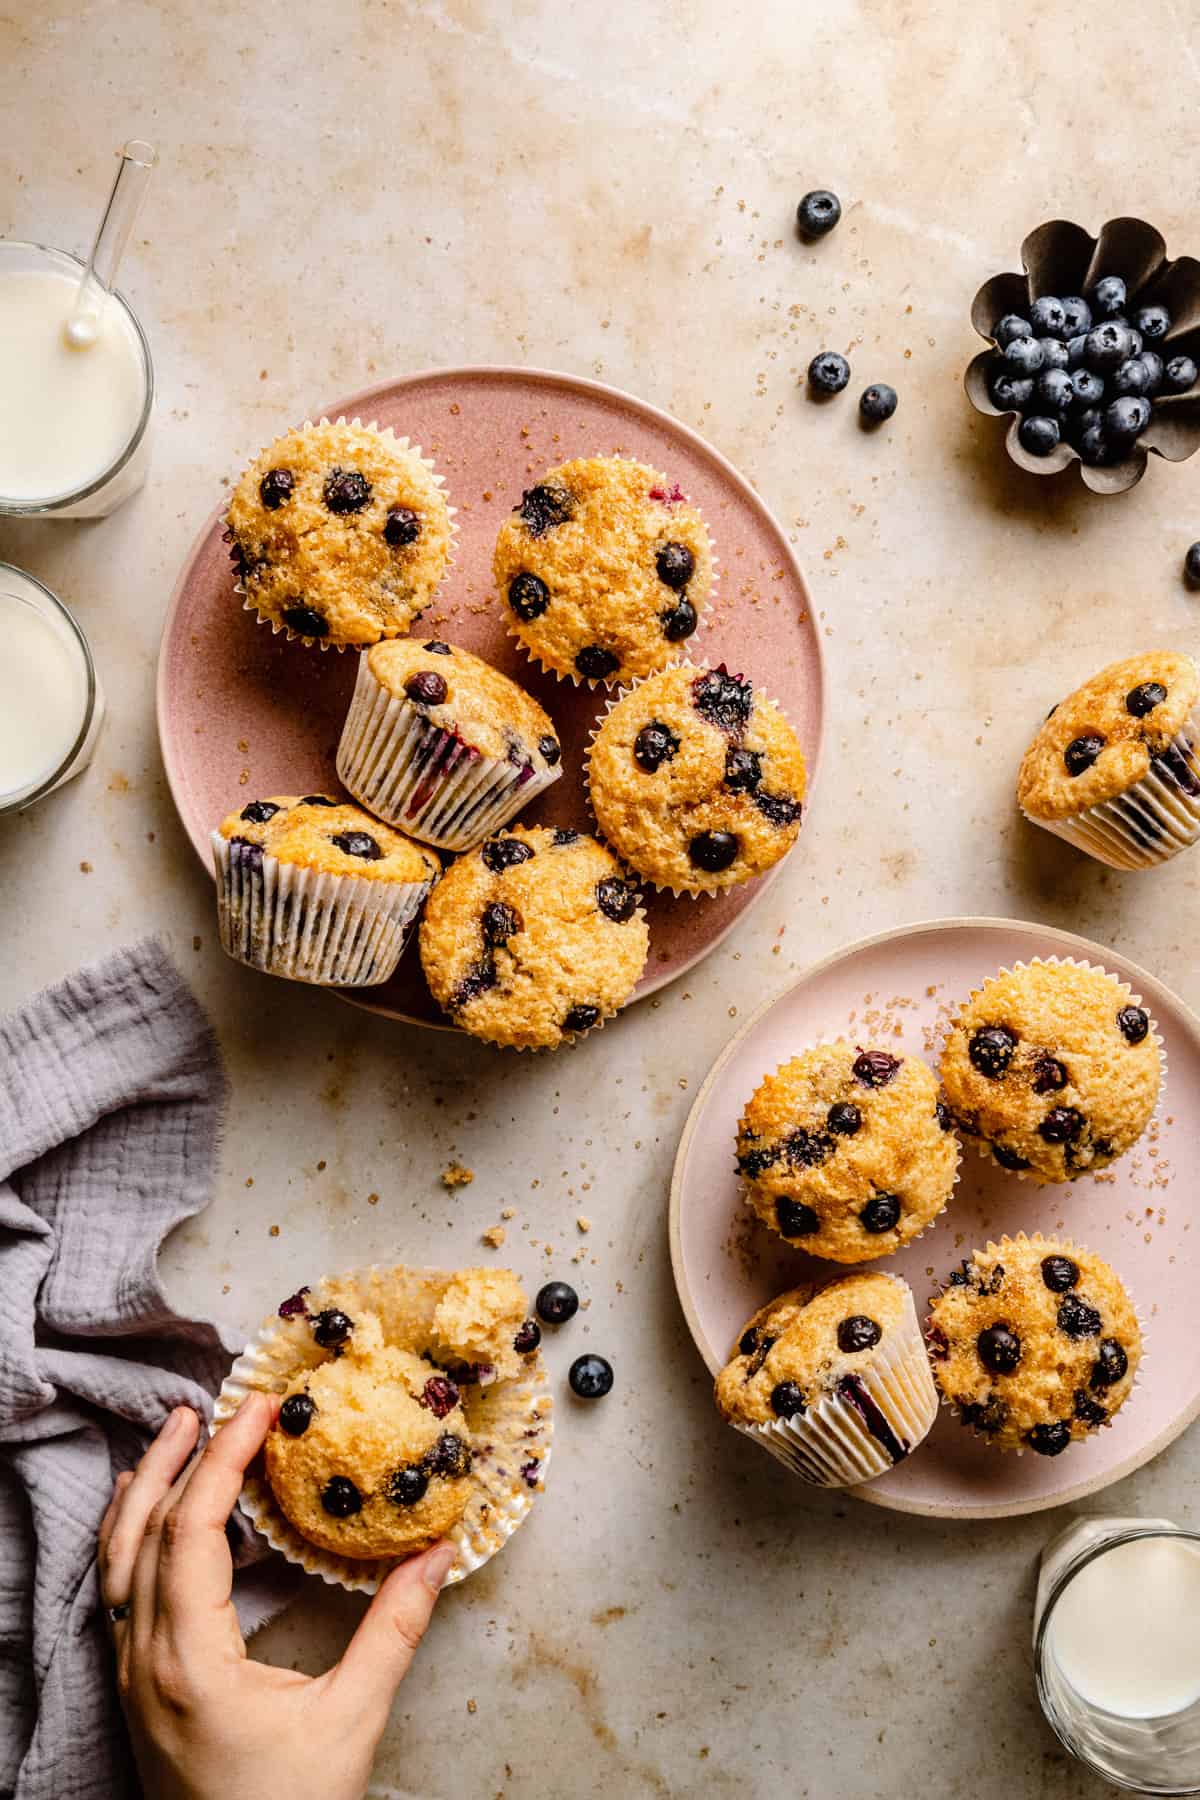 A breakfast scene of sourdough blueberry muffins with plates, milk and napkin.